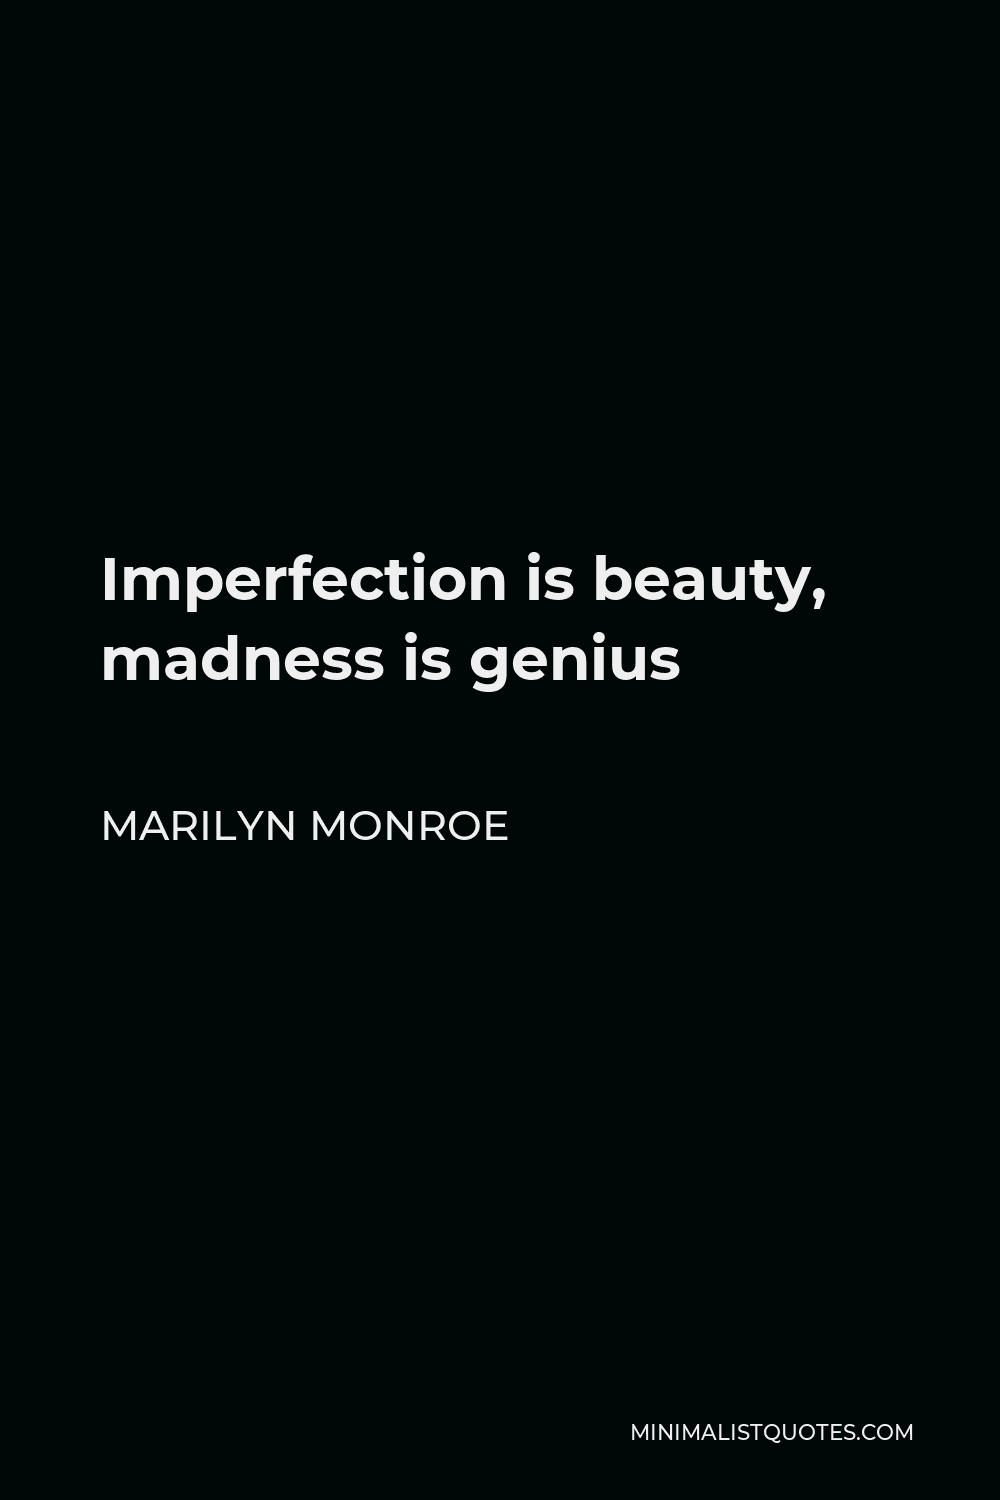 Marilyn Monroe Quote - Imperfection is beauty, madness is genius